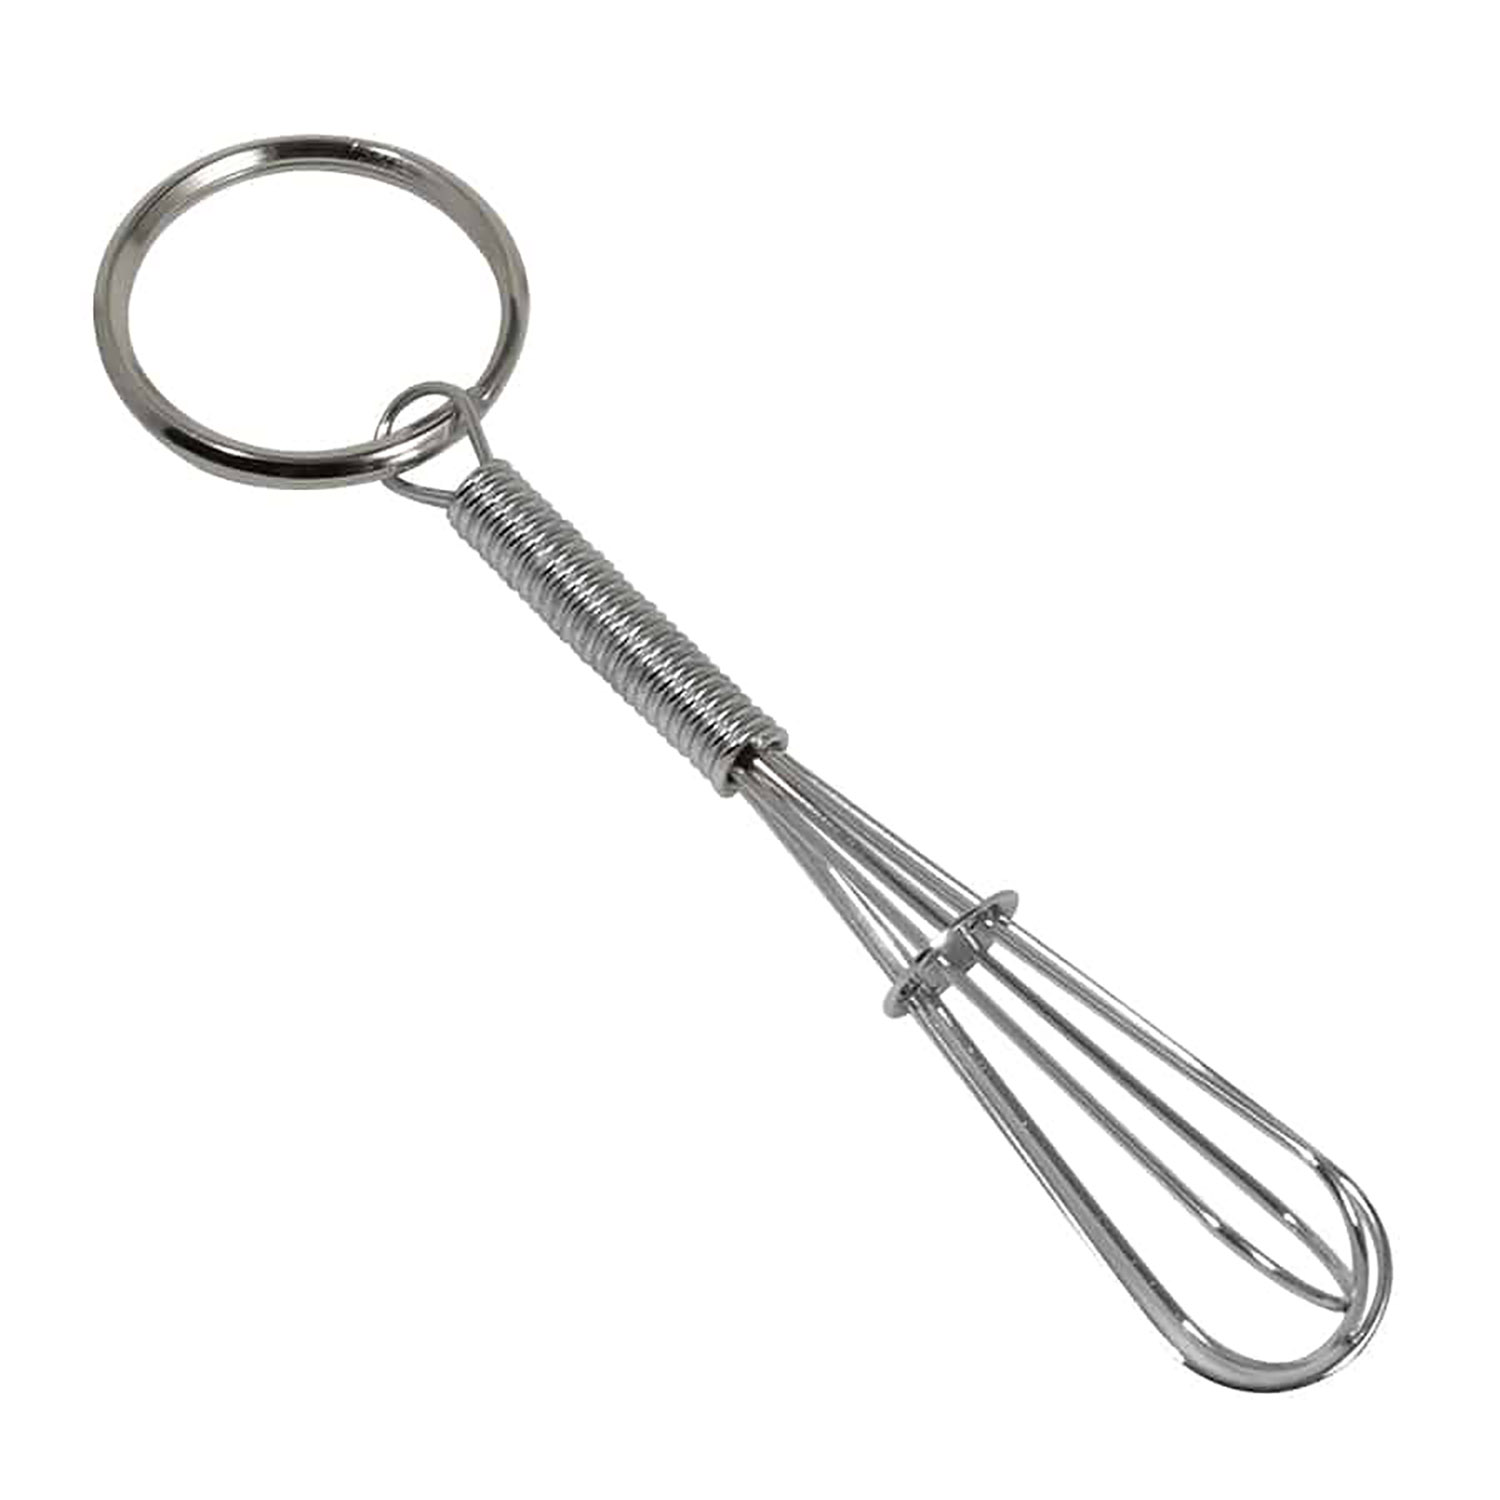 Norpro Stainless Steel Cocktail Mini Whisk